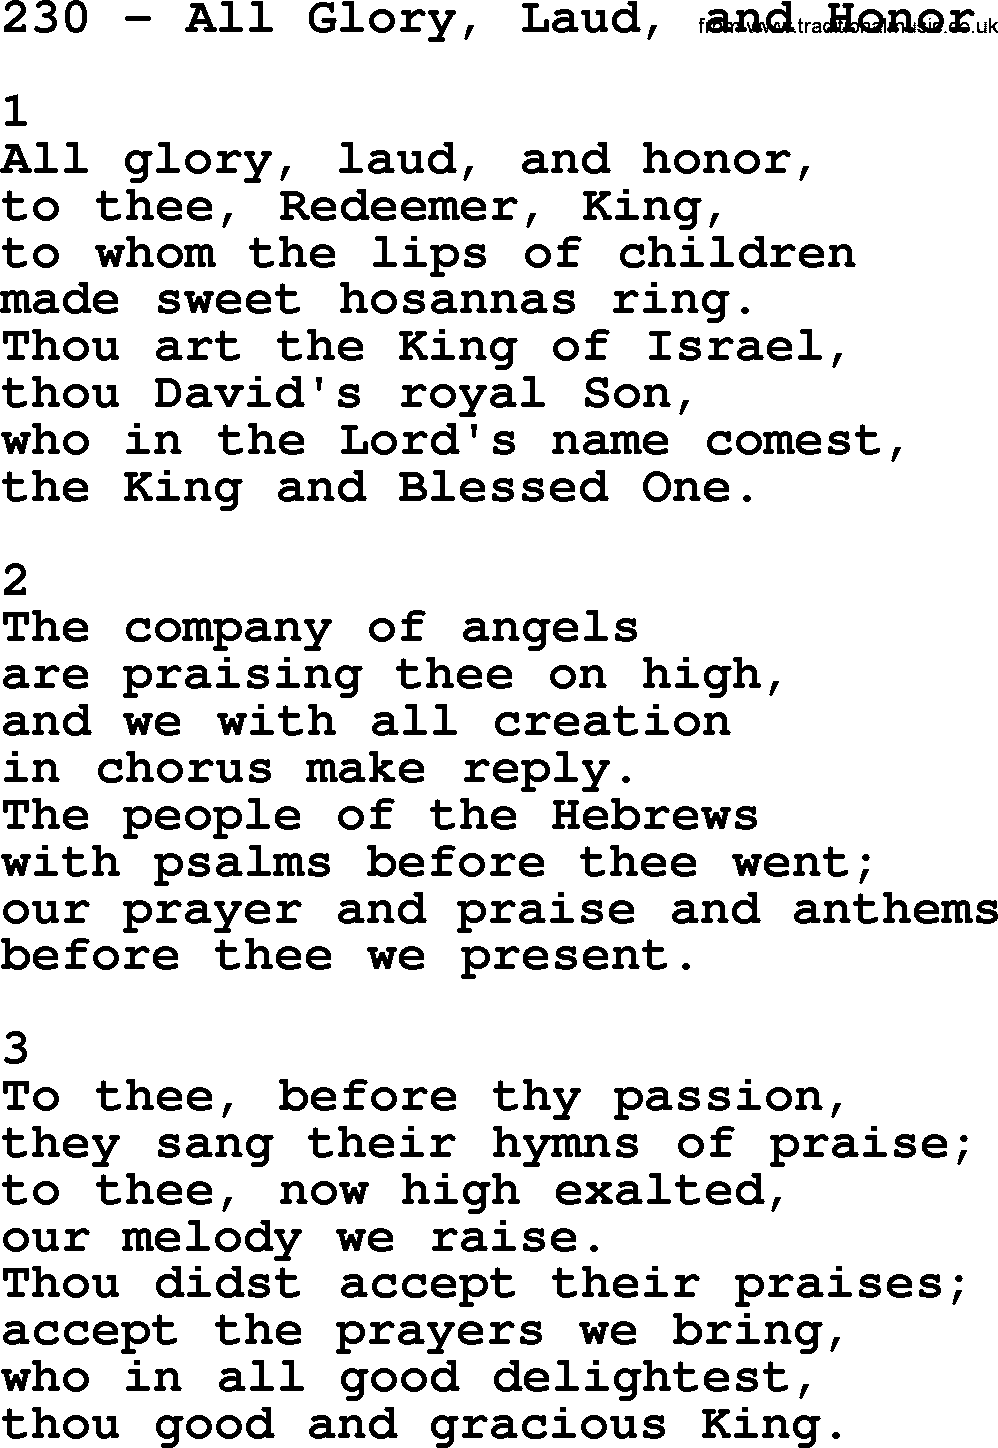 Complete Adventis Hymnal, title: 230-All Glory, Laud, And Honor, with lyrics, midi, mp3, powerpoints(PPT) and PDF,